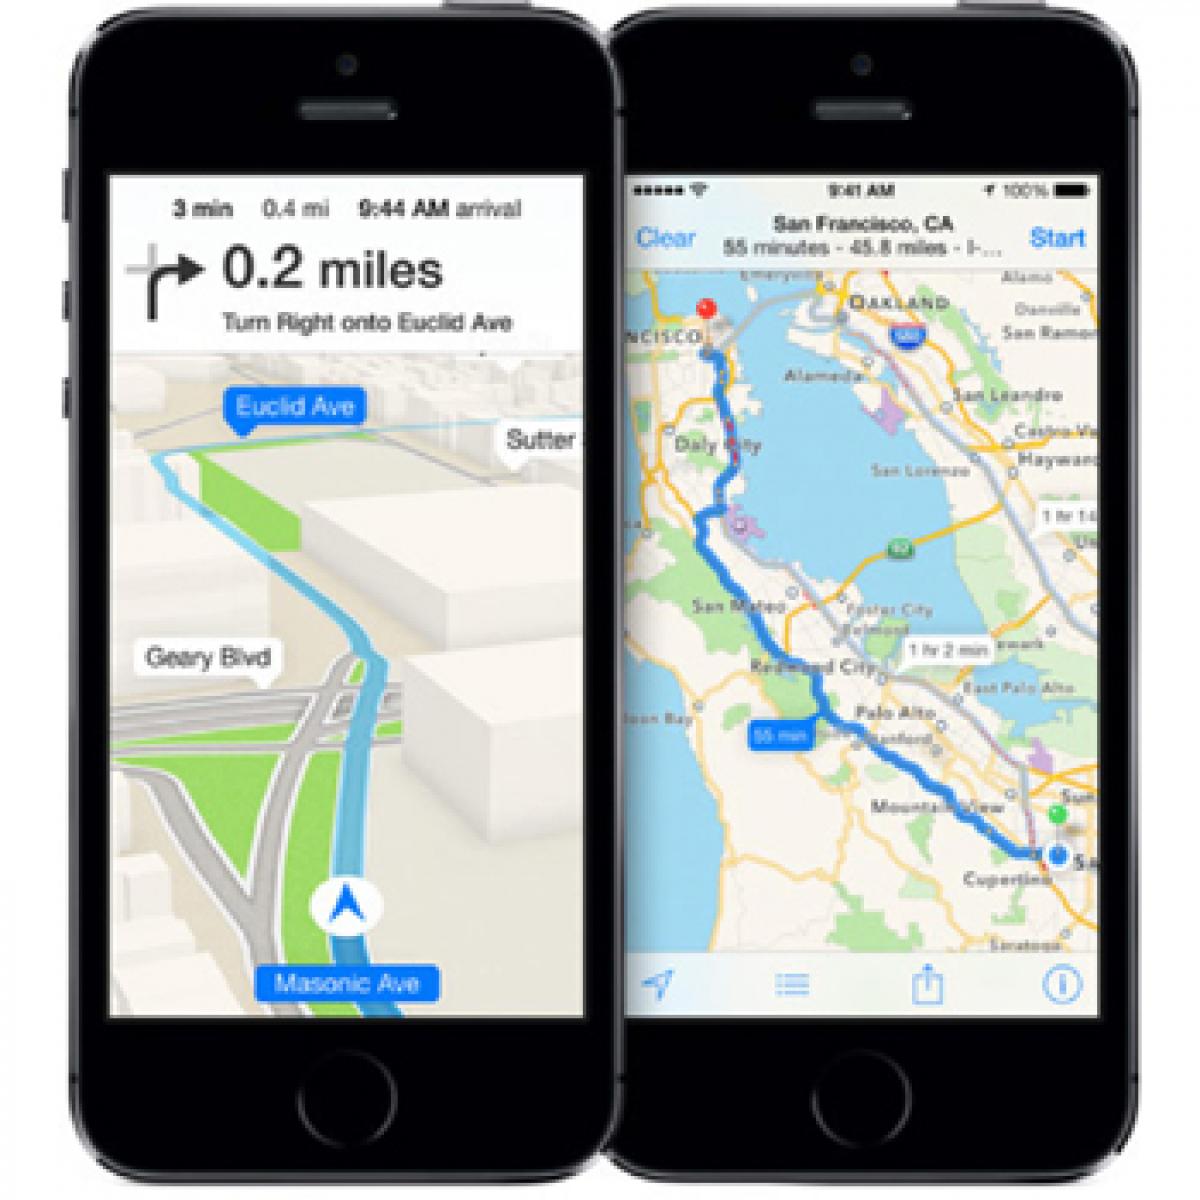 Apple Maps could soon be available on Android